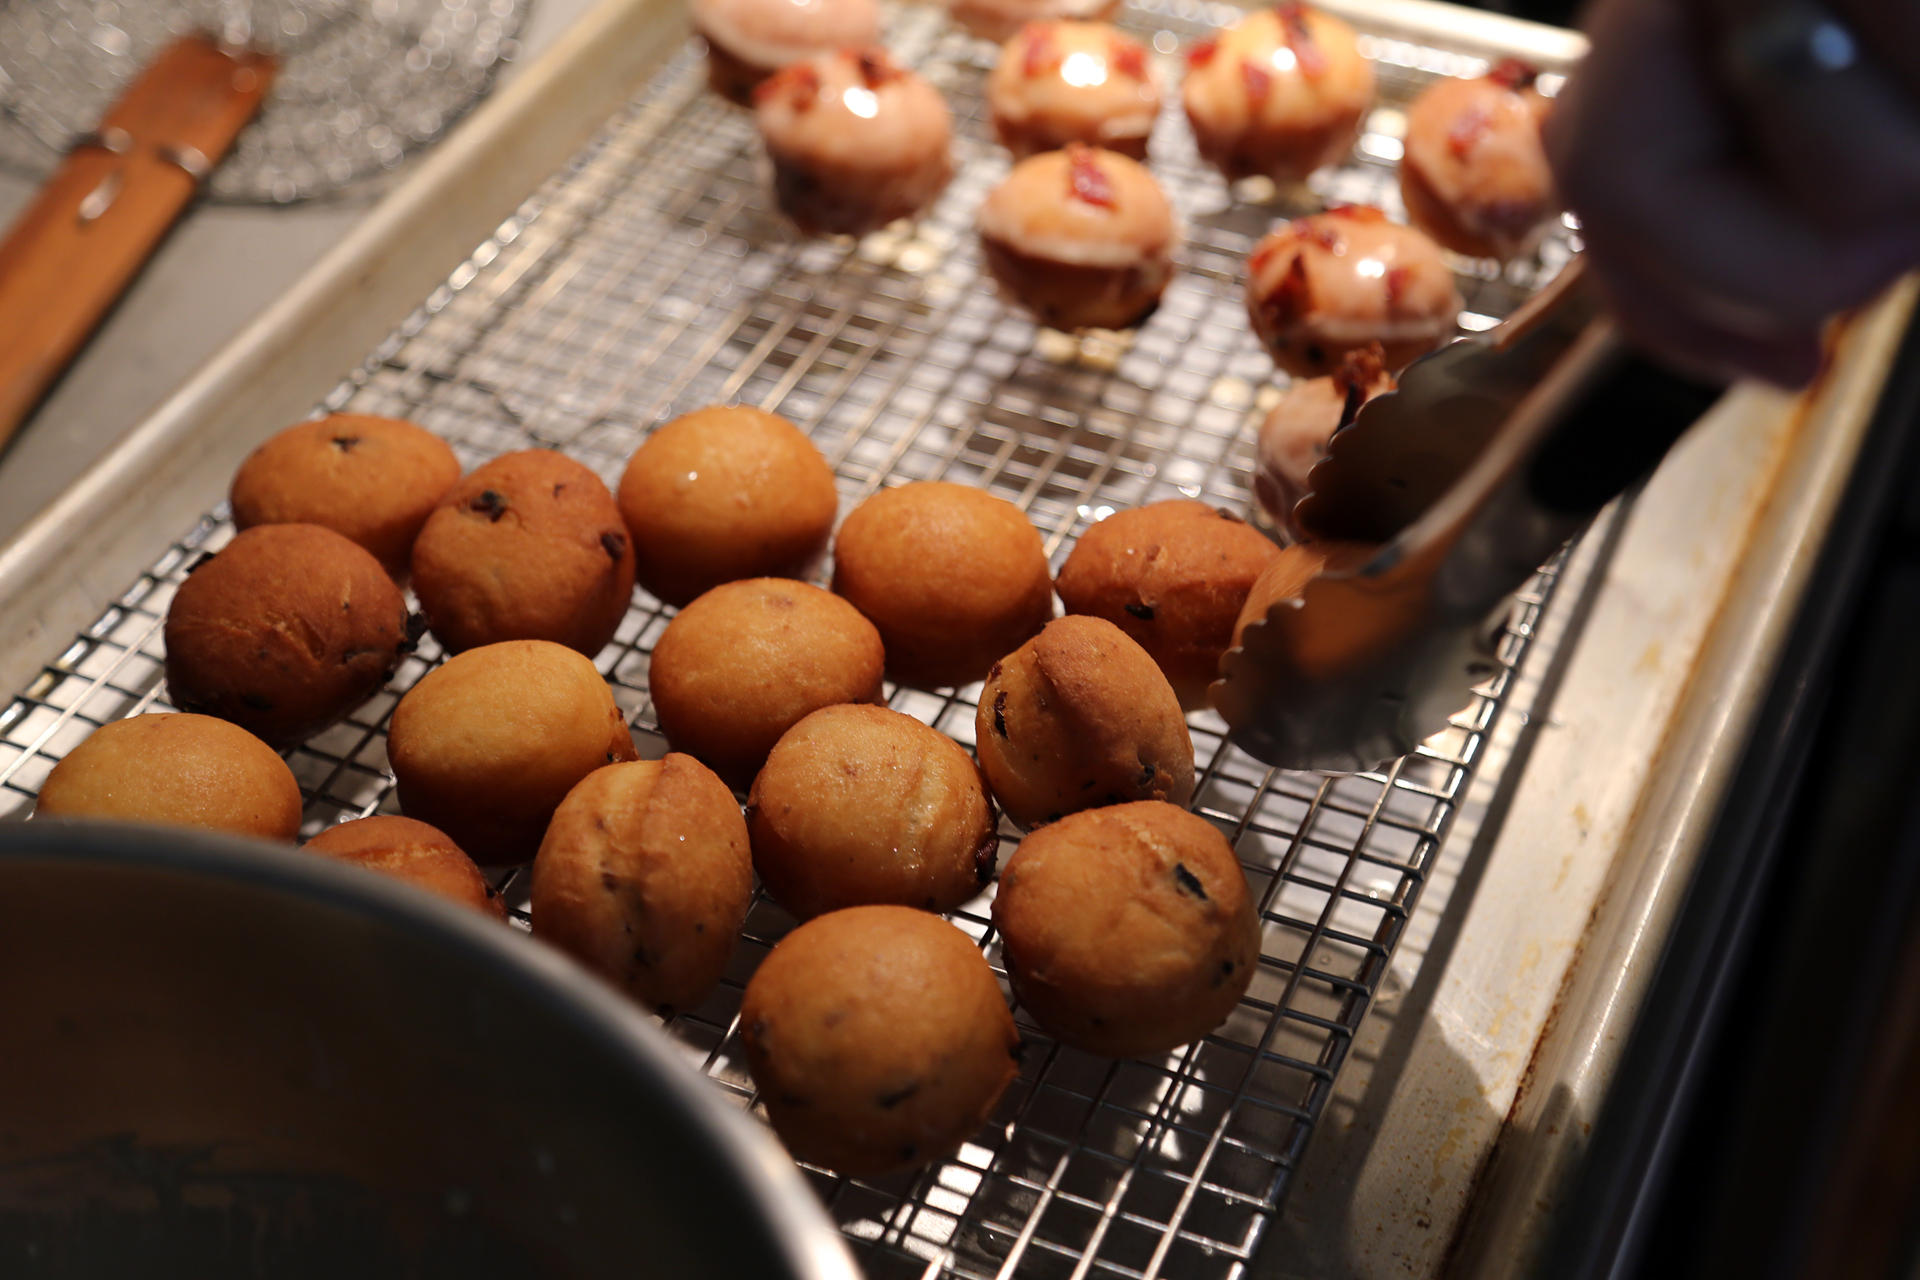 Remove the donuts, drain on a wire rack over a paper towel, and let cool slightly before glazing.